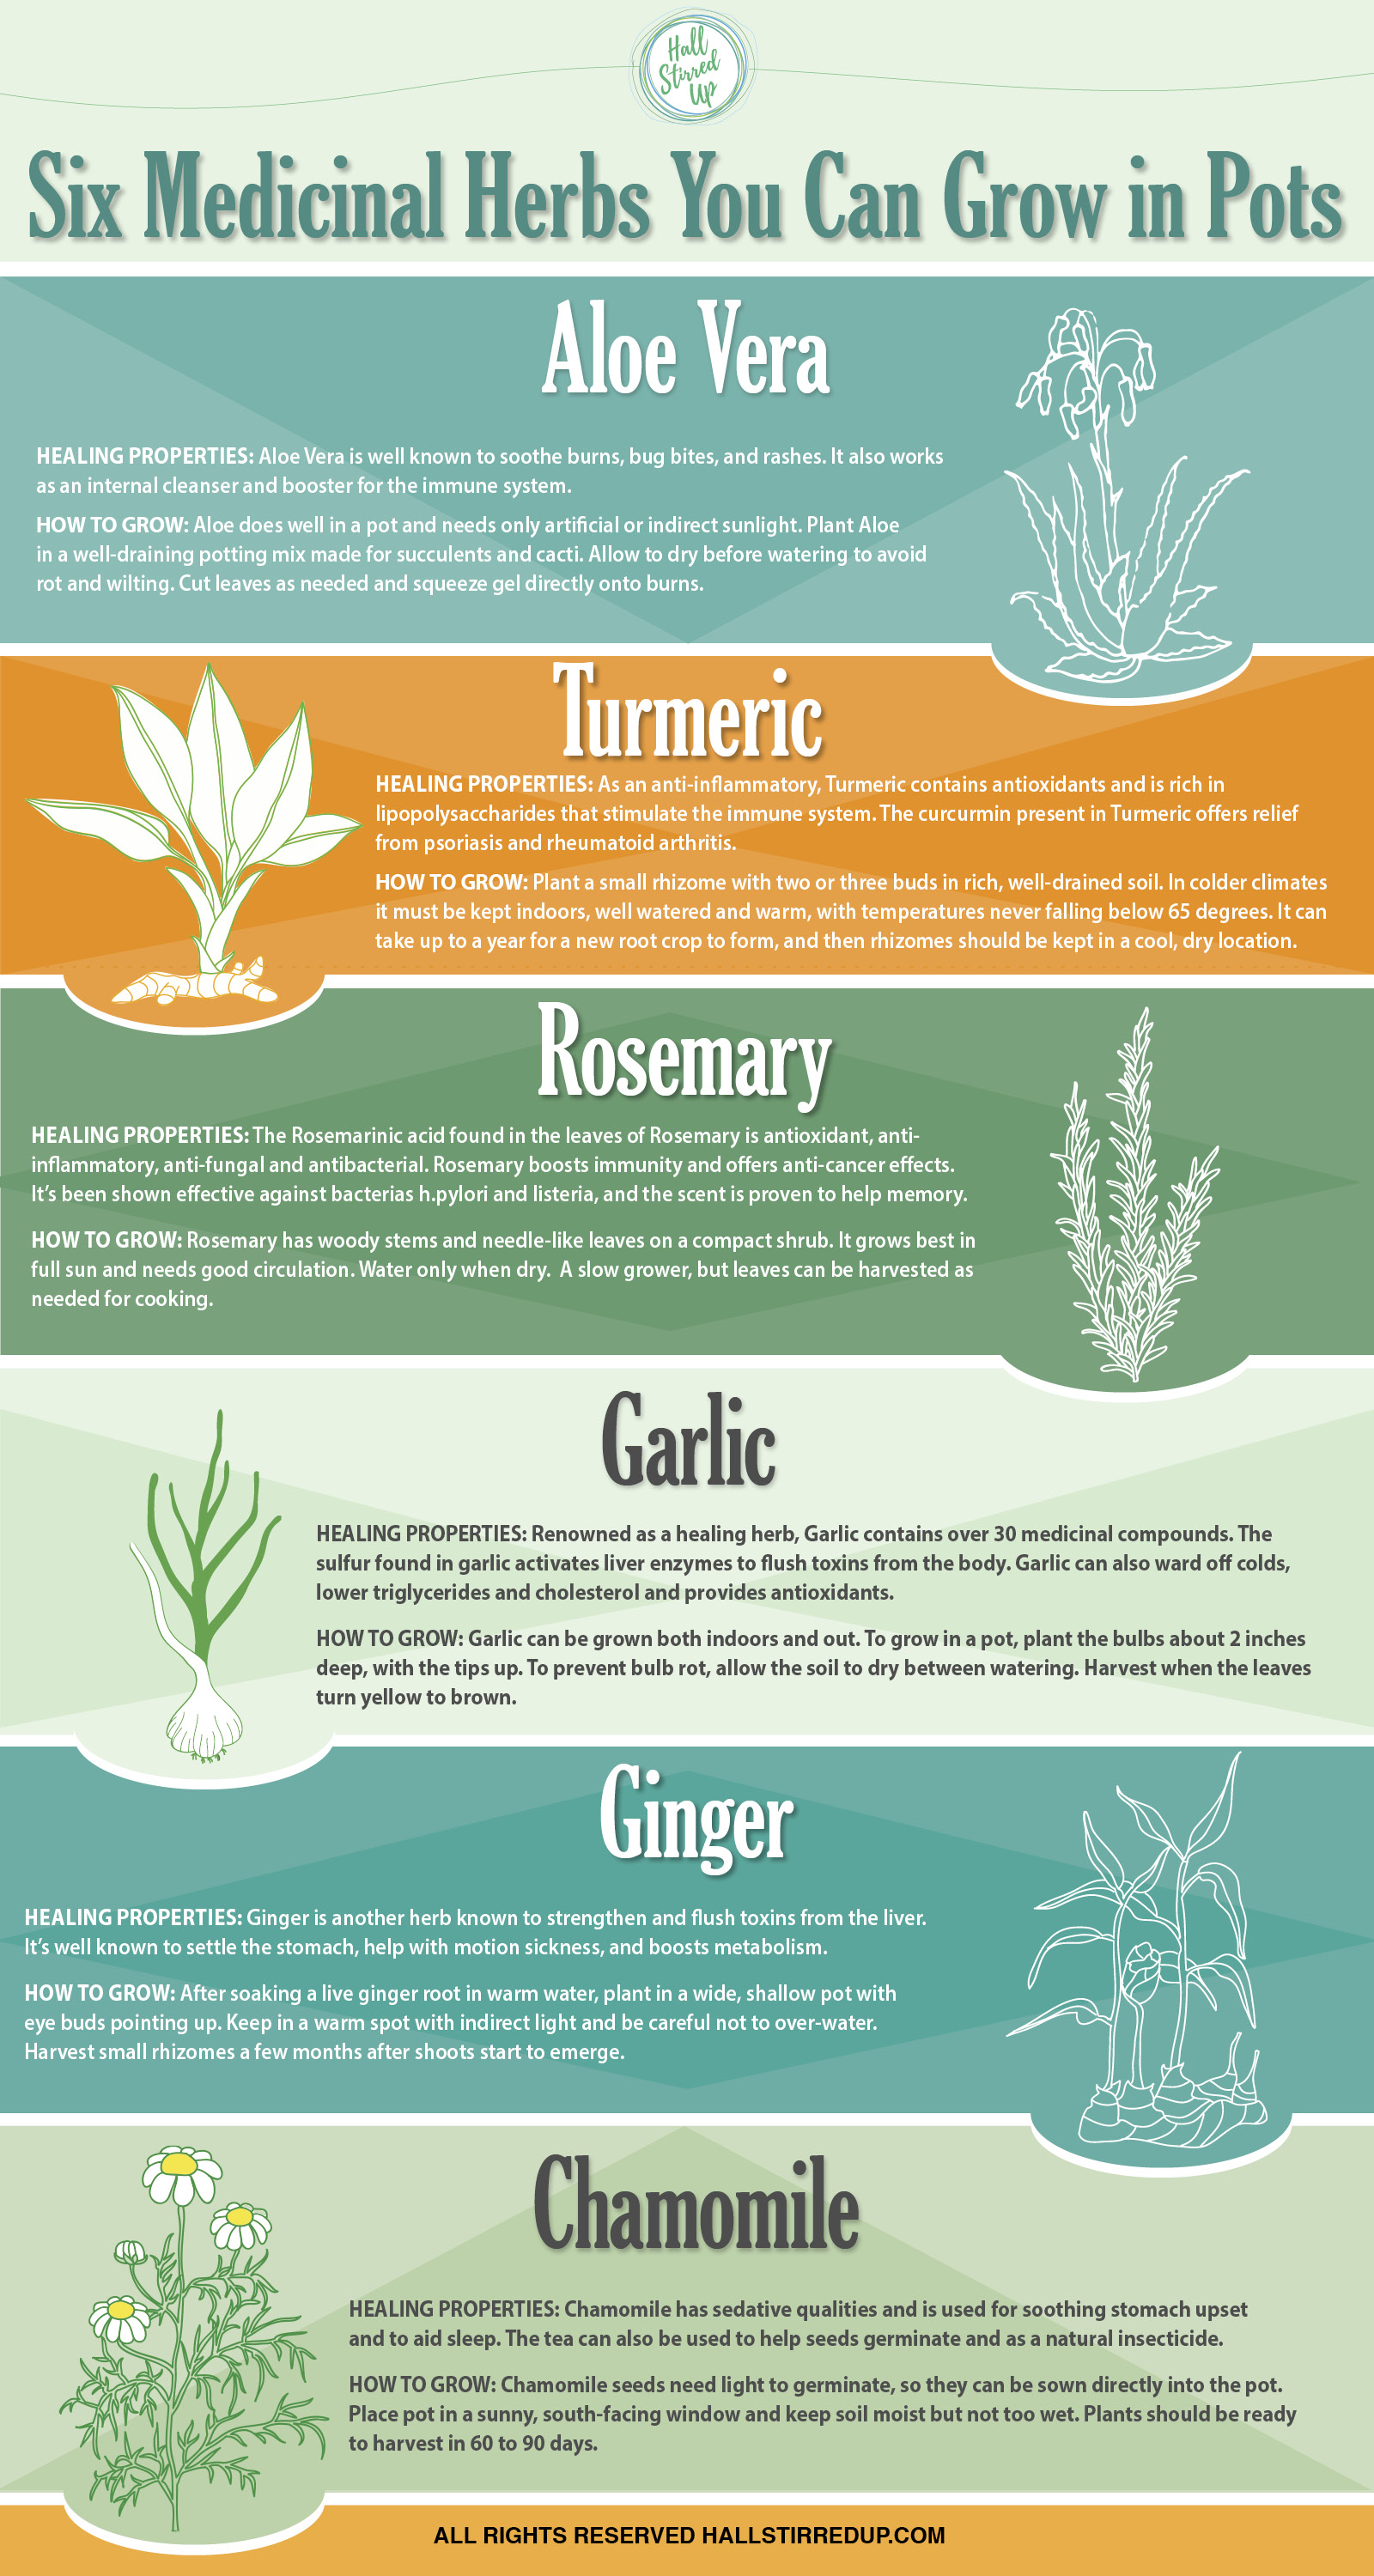 6-Medicinal-Herbs-You-Can-Grow-In-Pots-Infographic